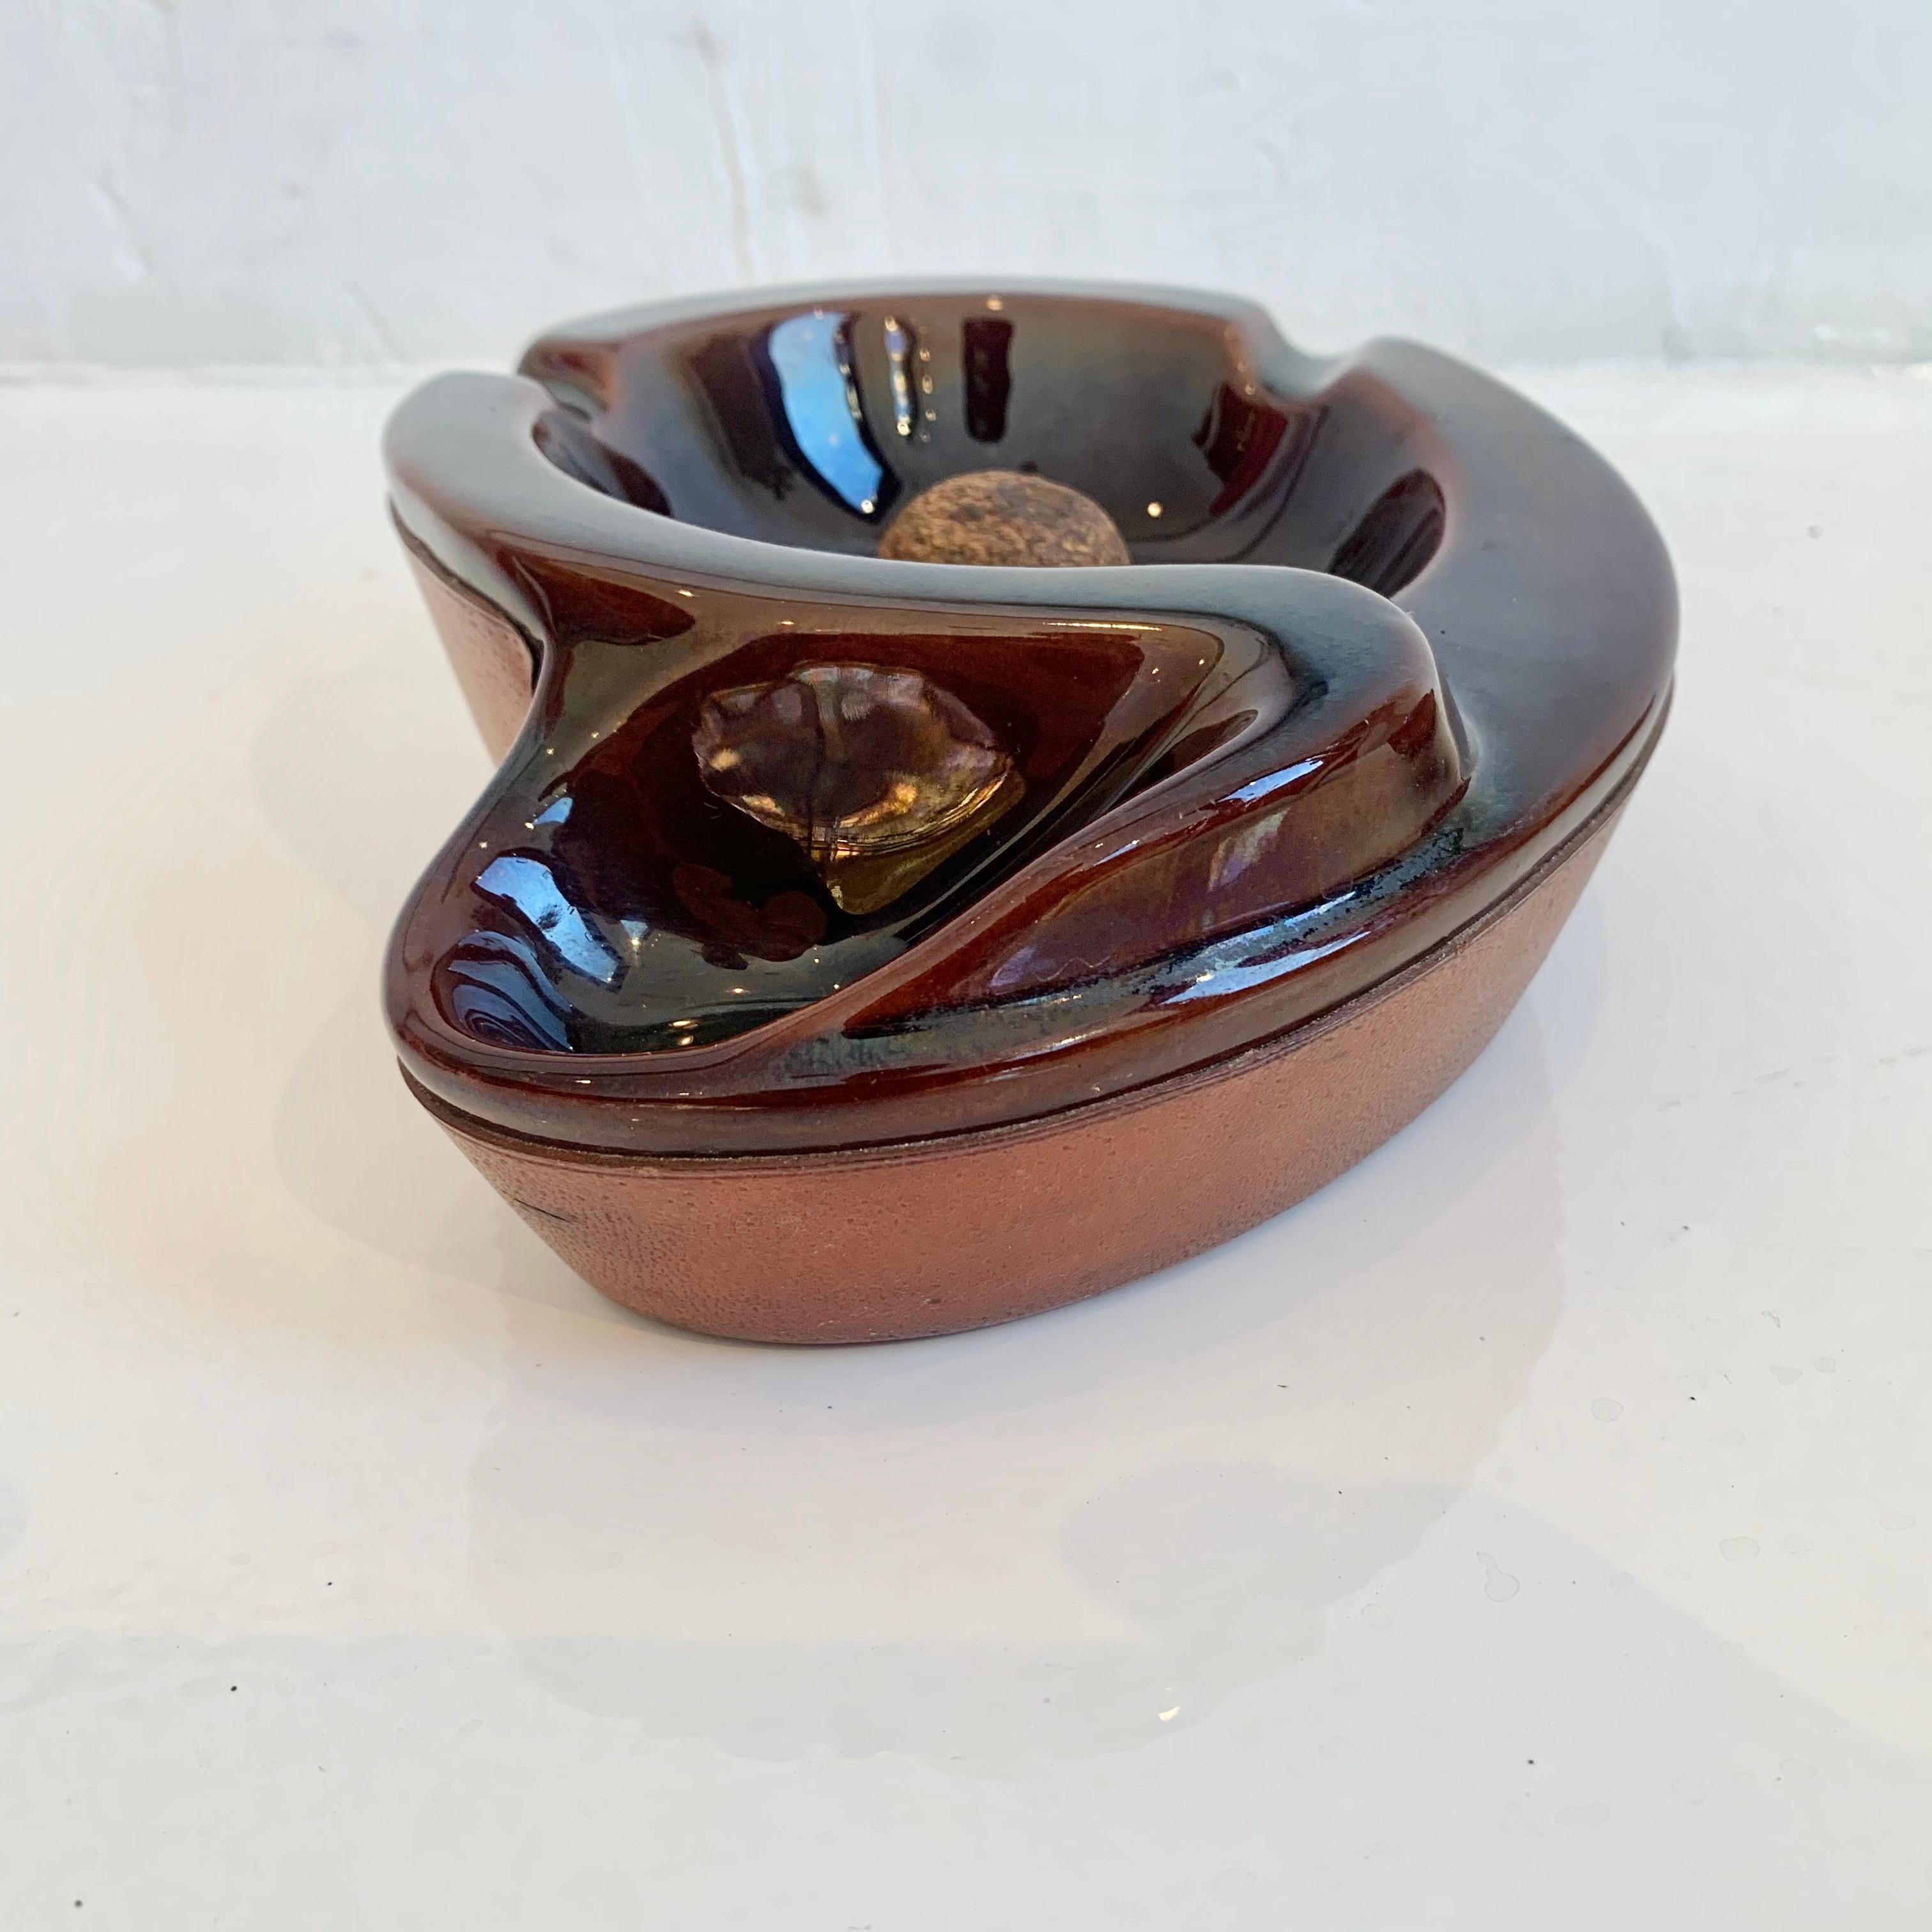 Handsome leather and ceramic ashtray/catchall by Longchamp. Biomorphic shape with inset ceramic tray and extended cigarette or pipe holder. Great saddle color leather. Great vintage condition.